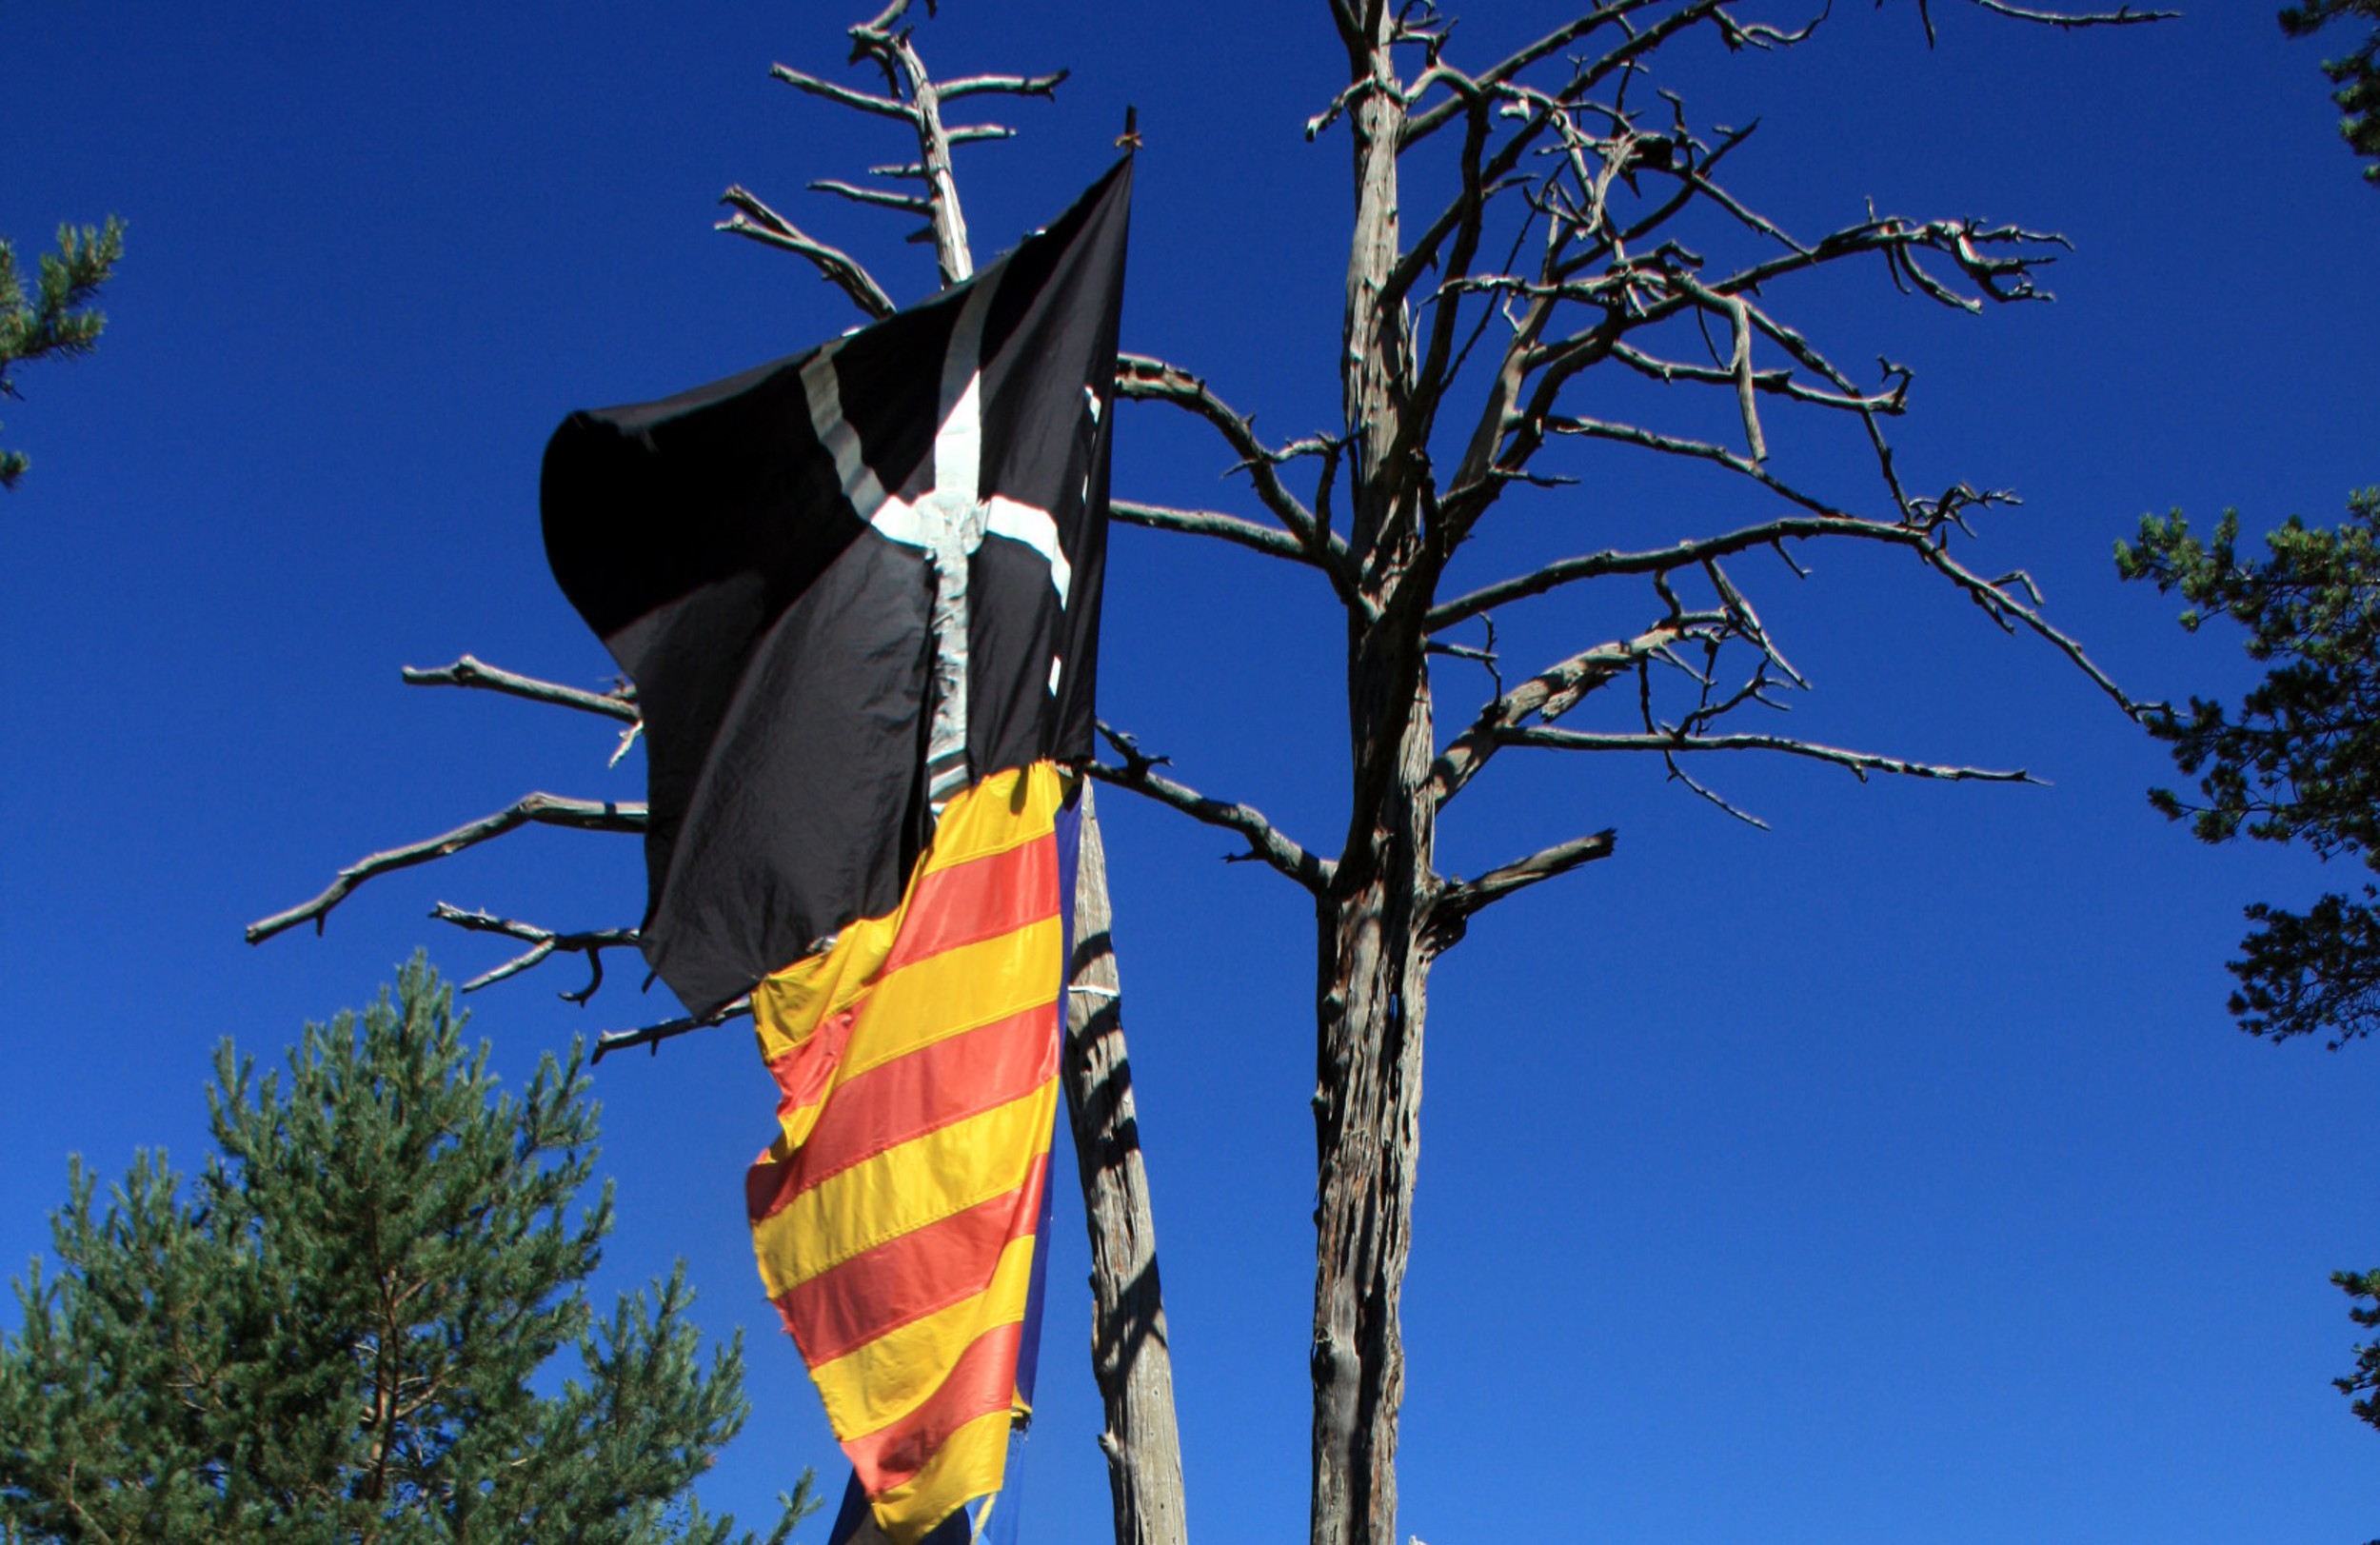 A black flag in support of Catalan independence (by ACN)